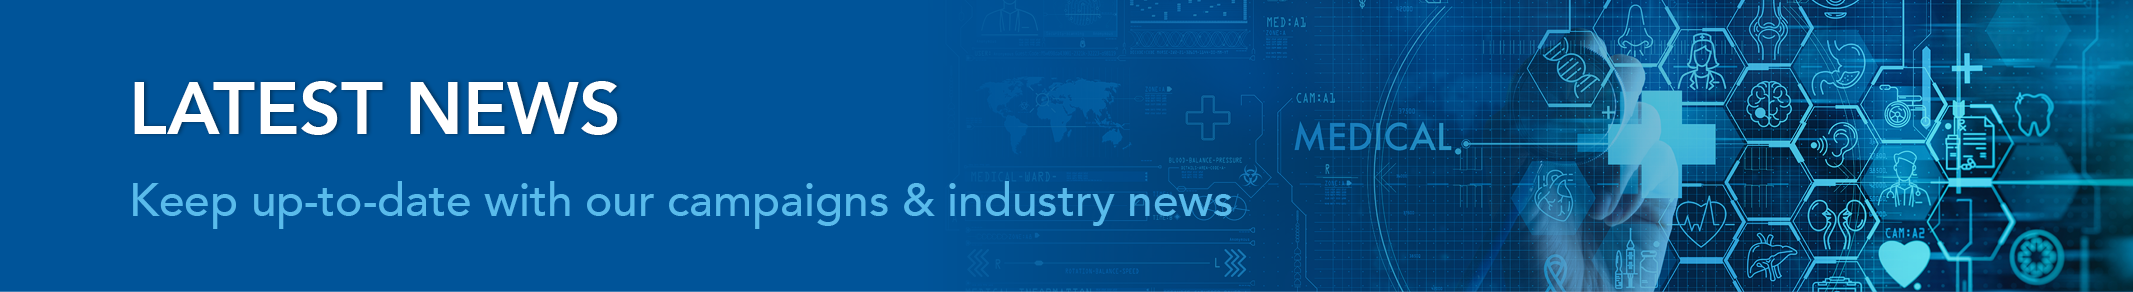 Industry Insight Latest April News